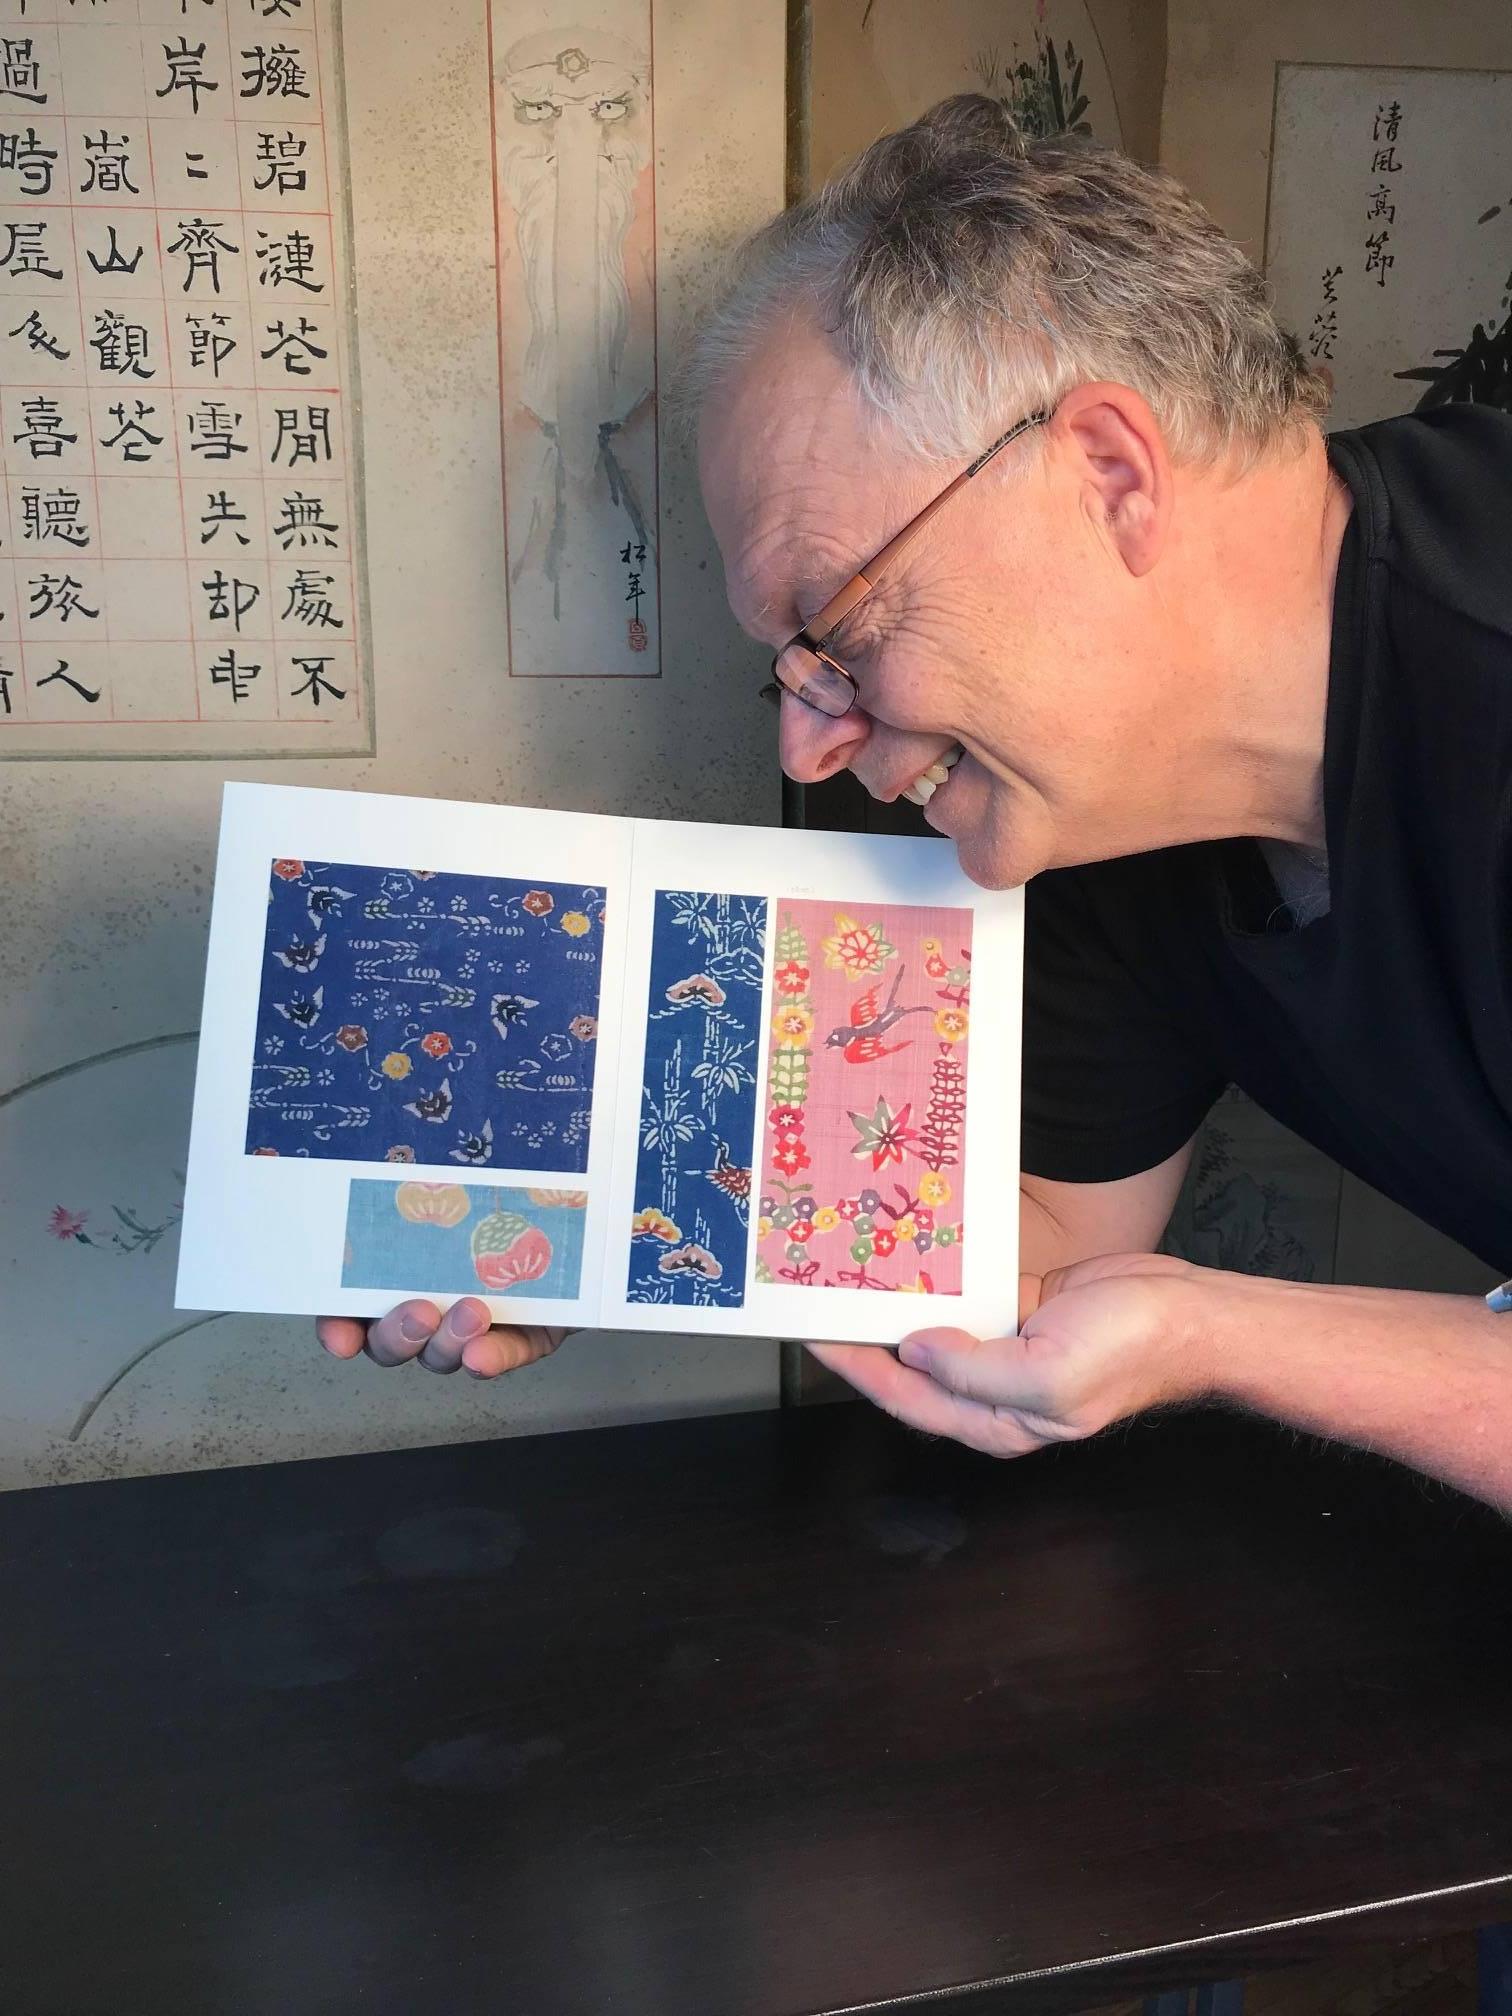 From an important Japanese Tokyo art collection found on our most recent trip to Japan.

This is a Japanese complete antique album of twenty eight (28) pages of authentic and old silk and spun cotton cloth fabric samples dating to the Edo period.